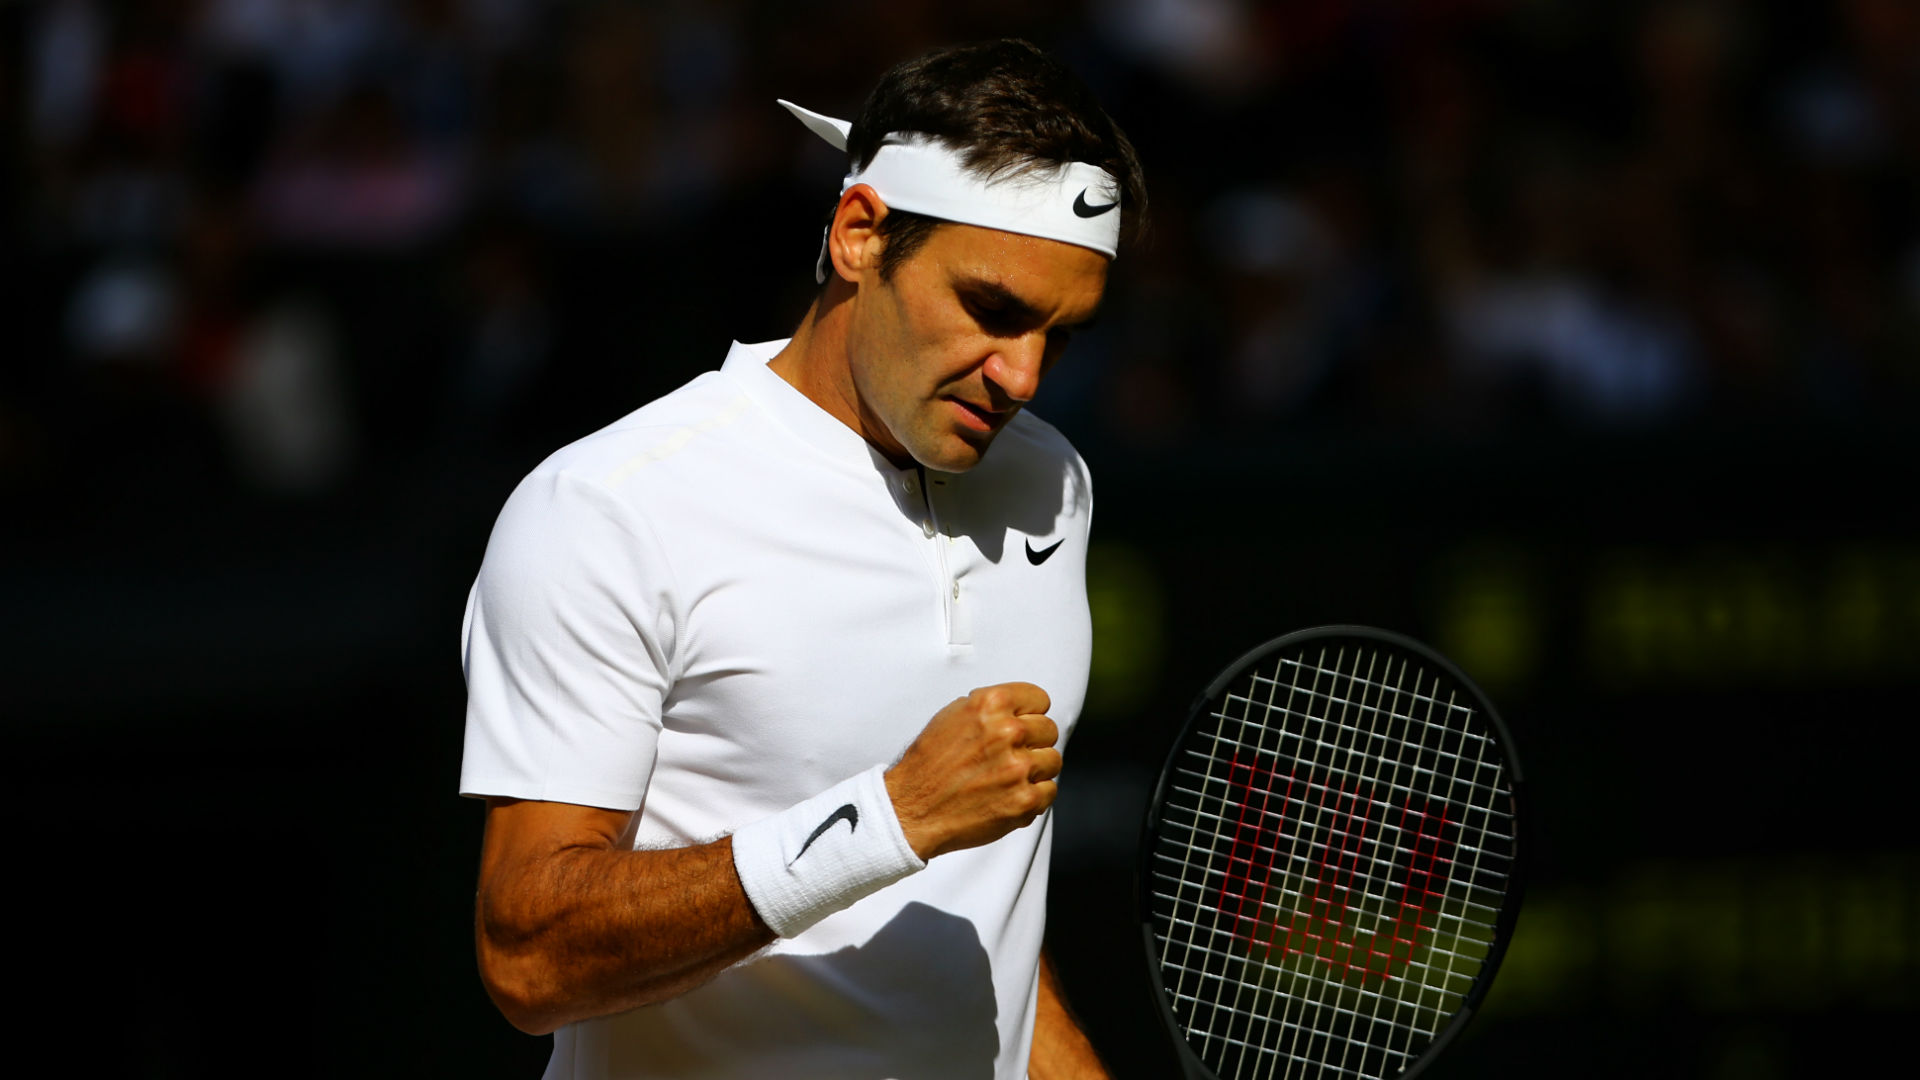 Federer Battles Past Berdych to Stand On the Brink of Wimbledon History